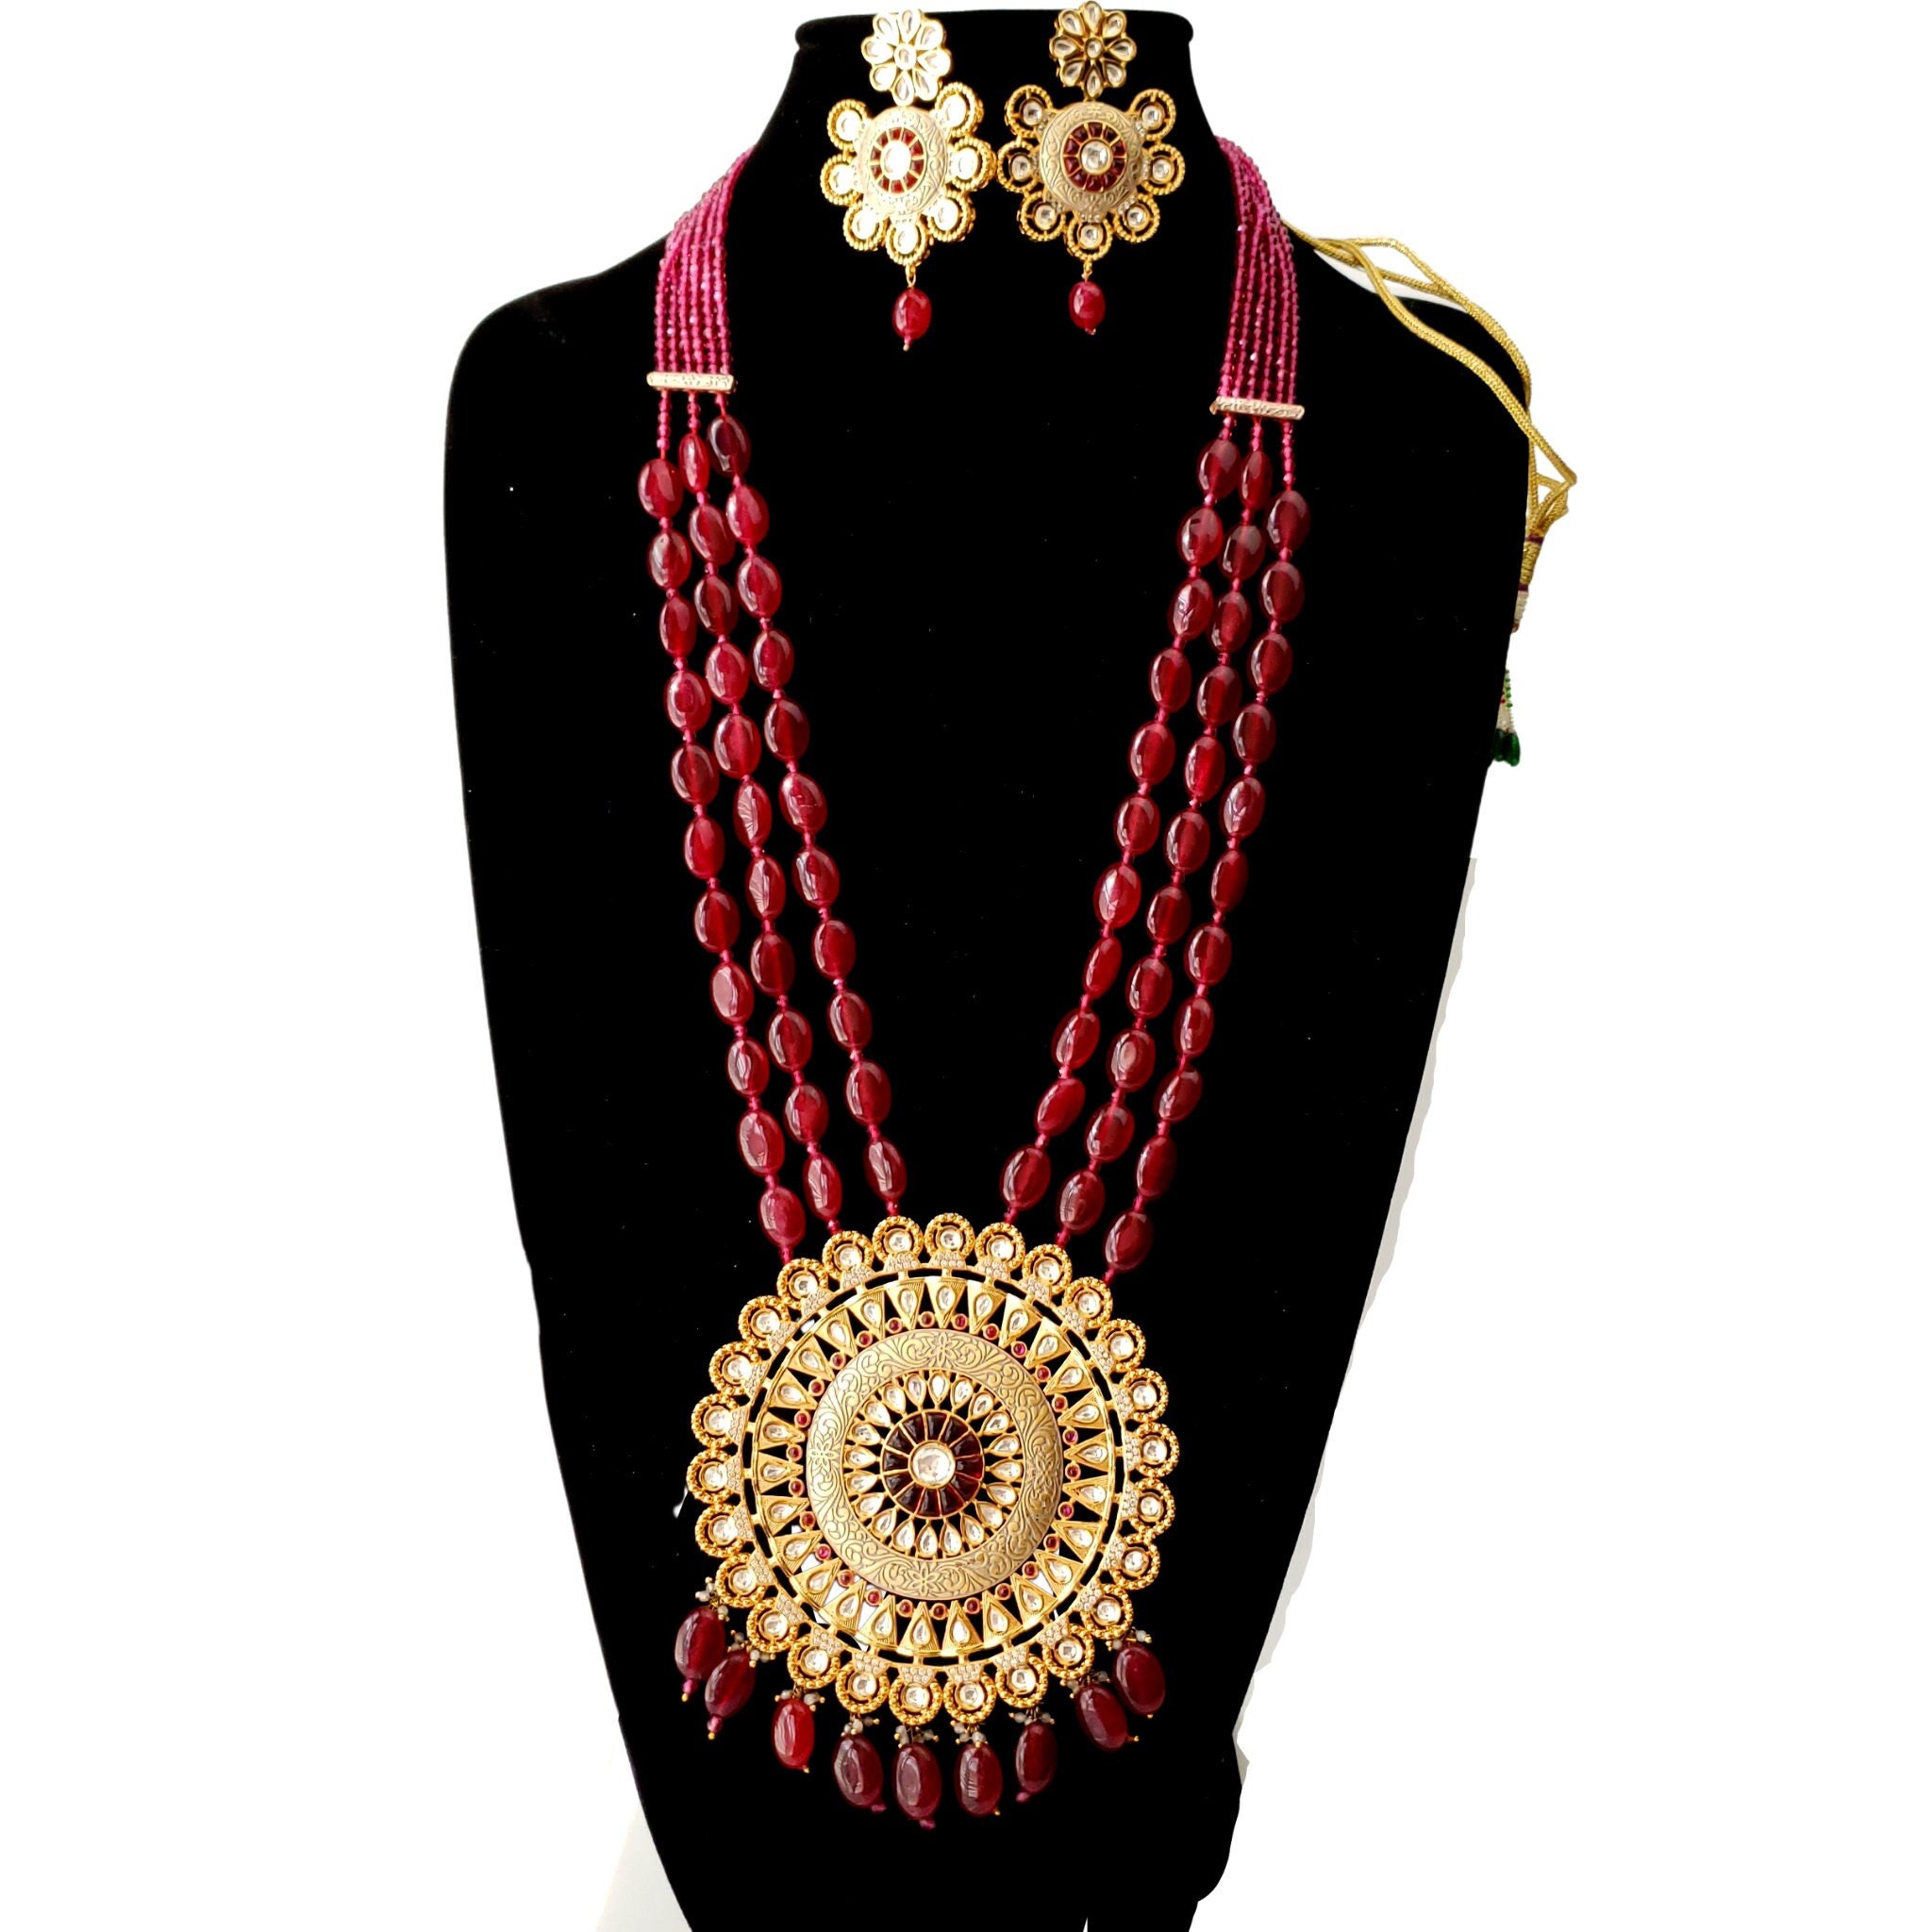 Stock gold indian wedding necklace with precious Vector Image